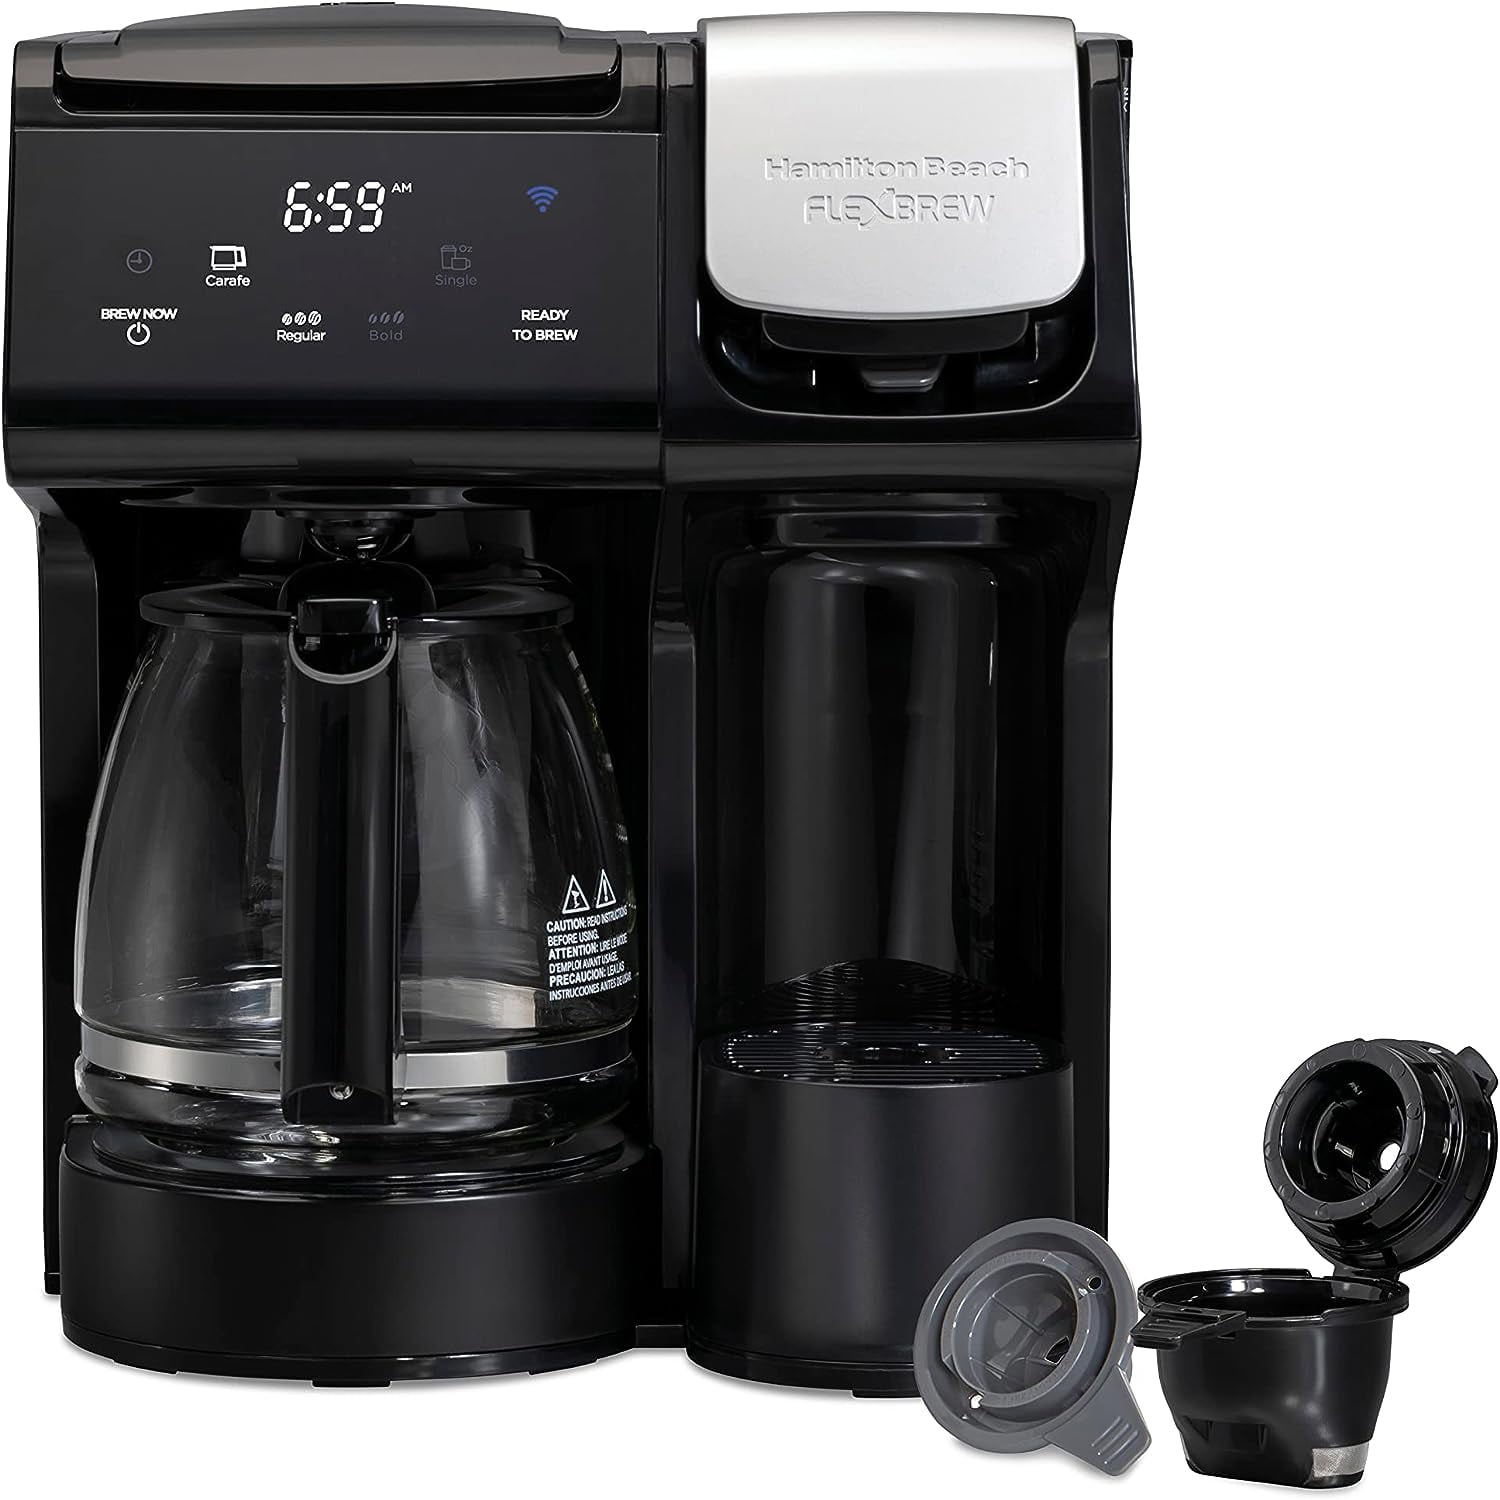 Hamilton Beach FlexBrew Trio 2-Way Coffee Maker, Compatible with K-Cup Pods  or Grounds, Combo, Single Serve & Full & Permanent Gold Tone Filter, Fits